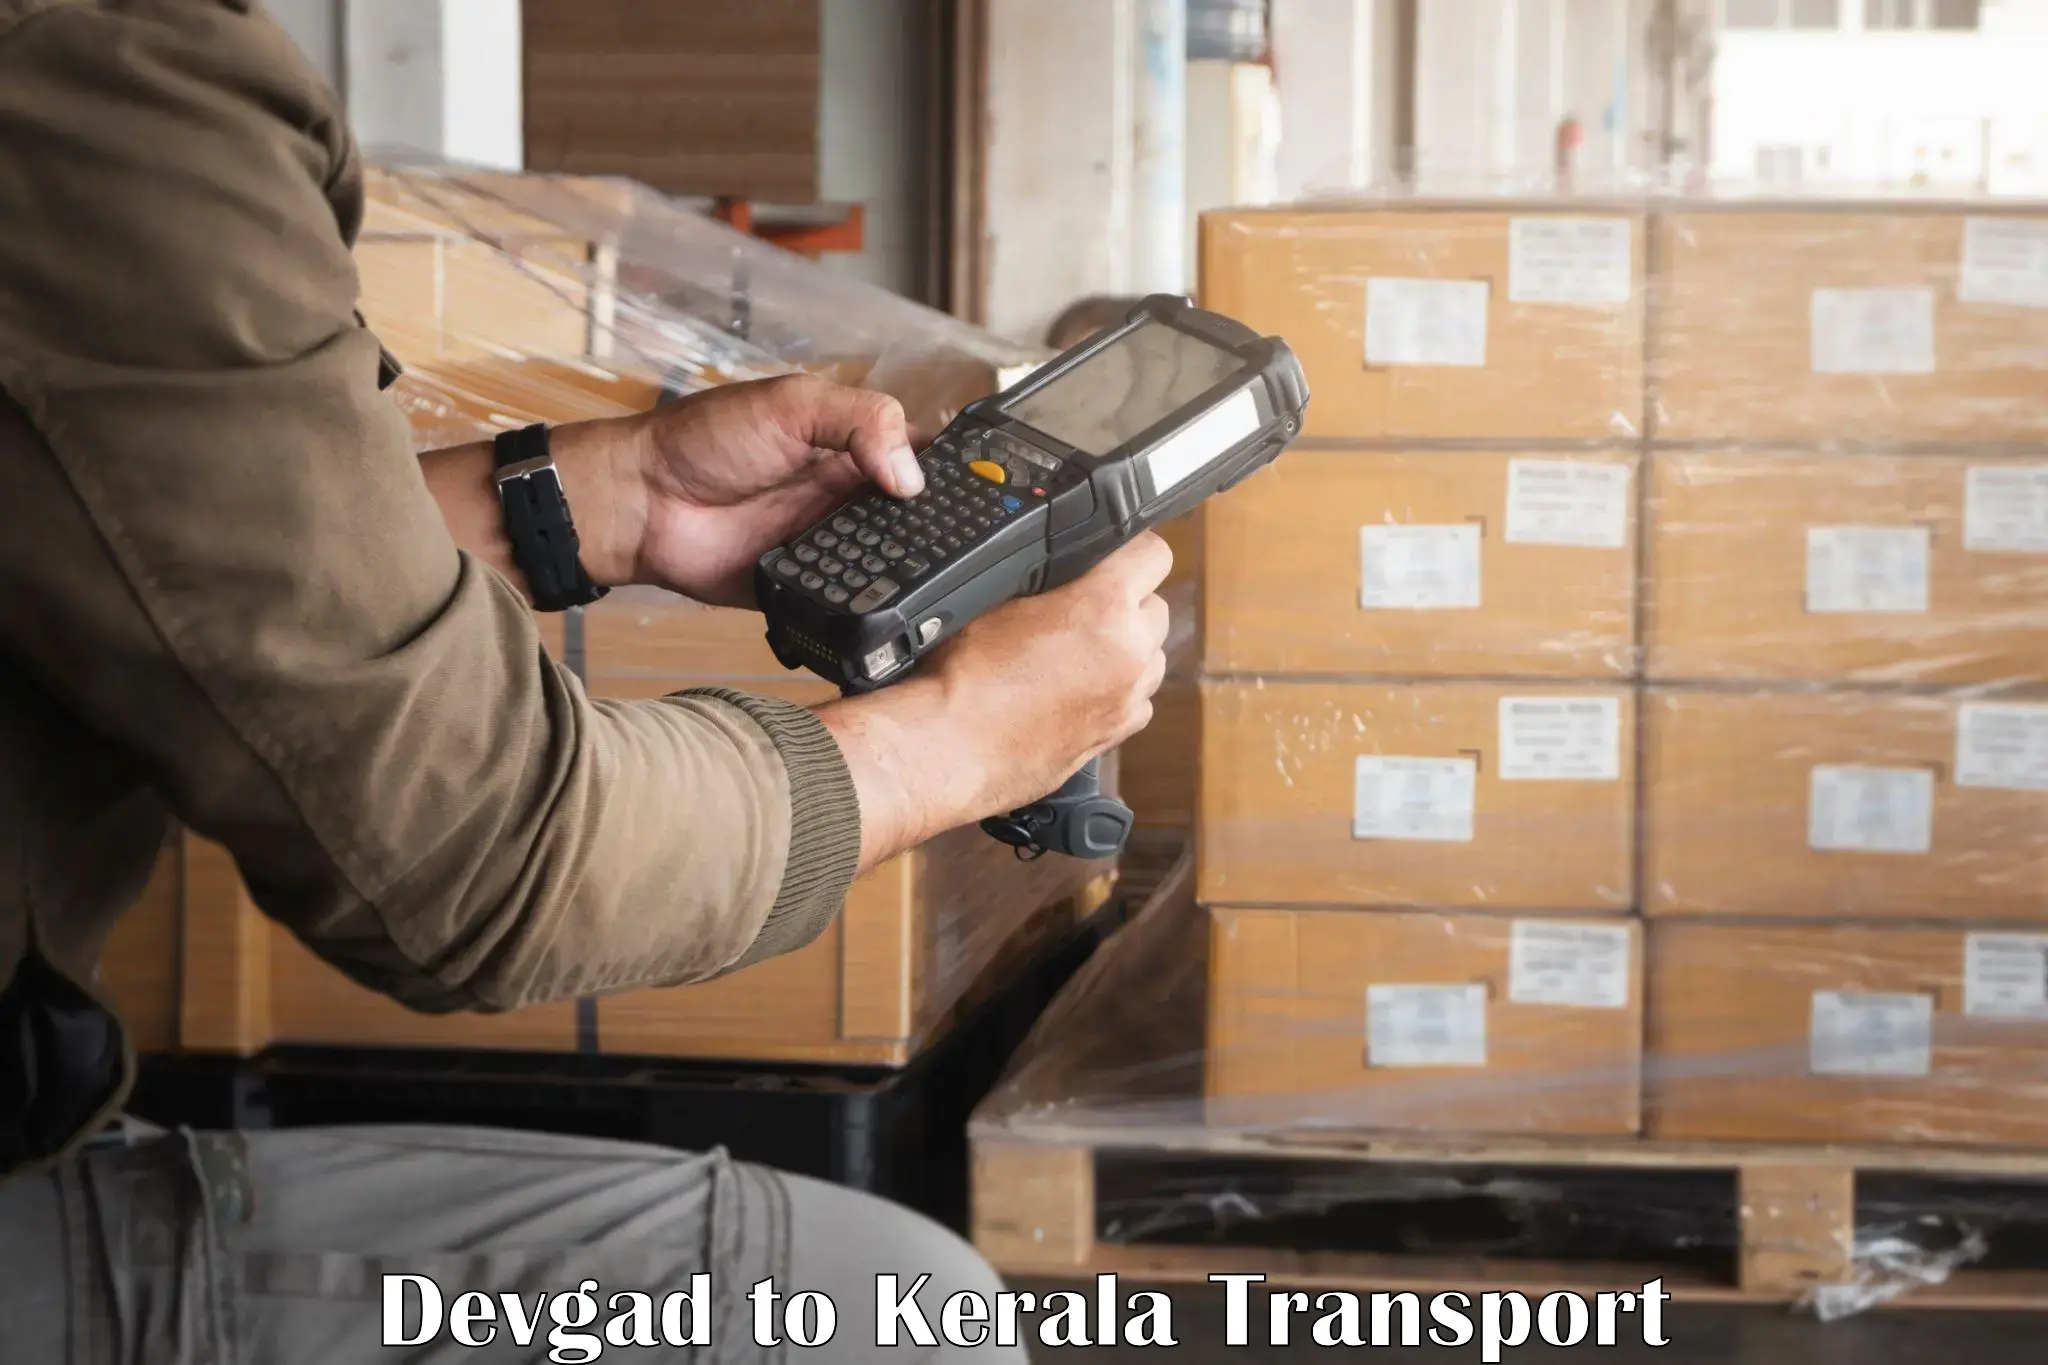 Goods delivery service Devgad to Kerala